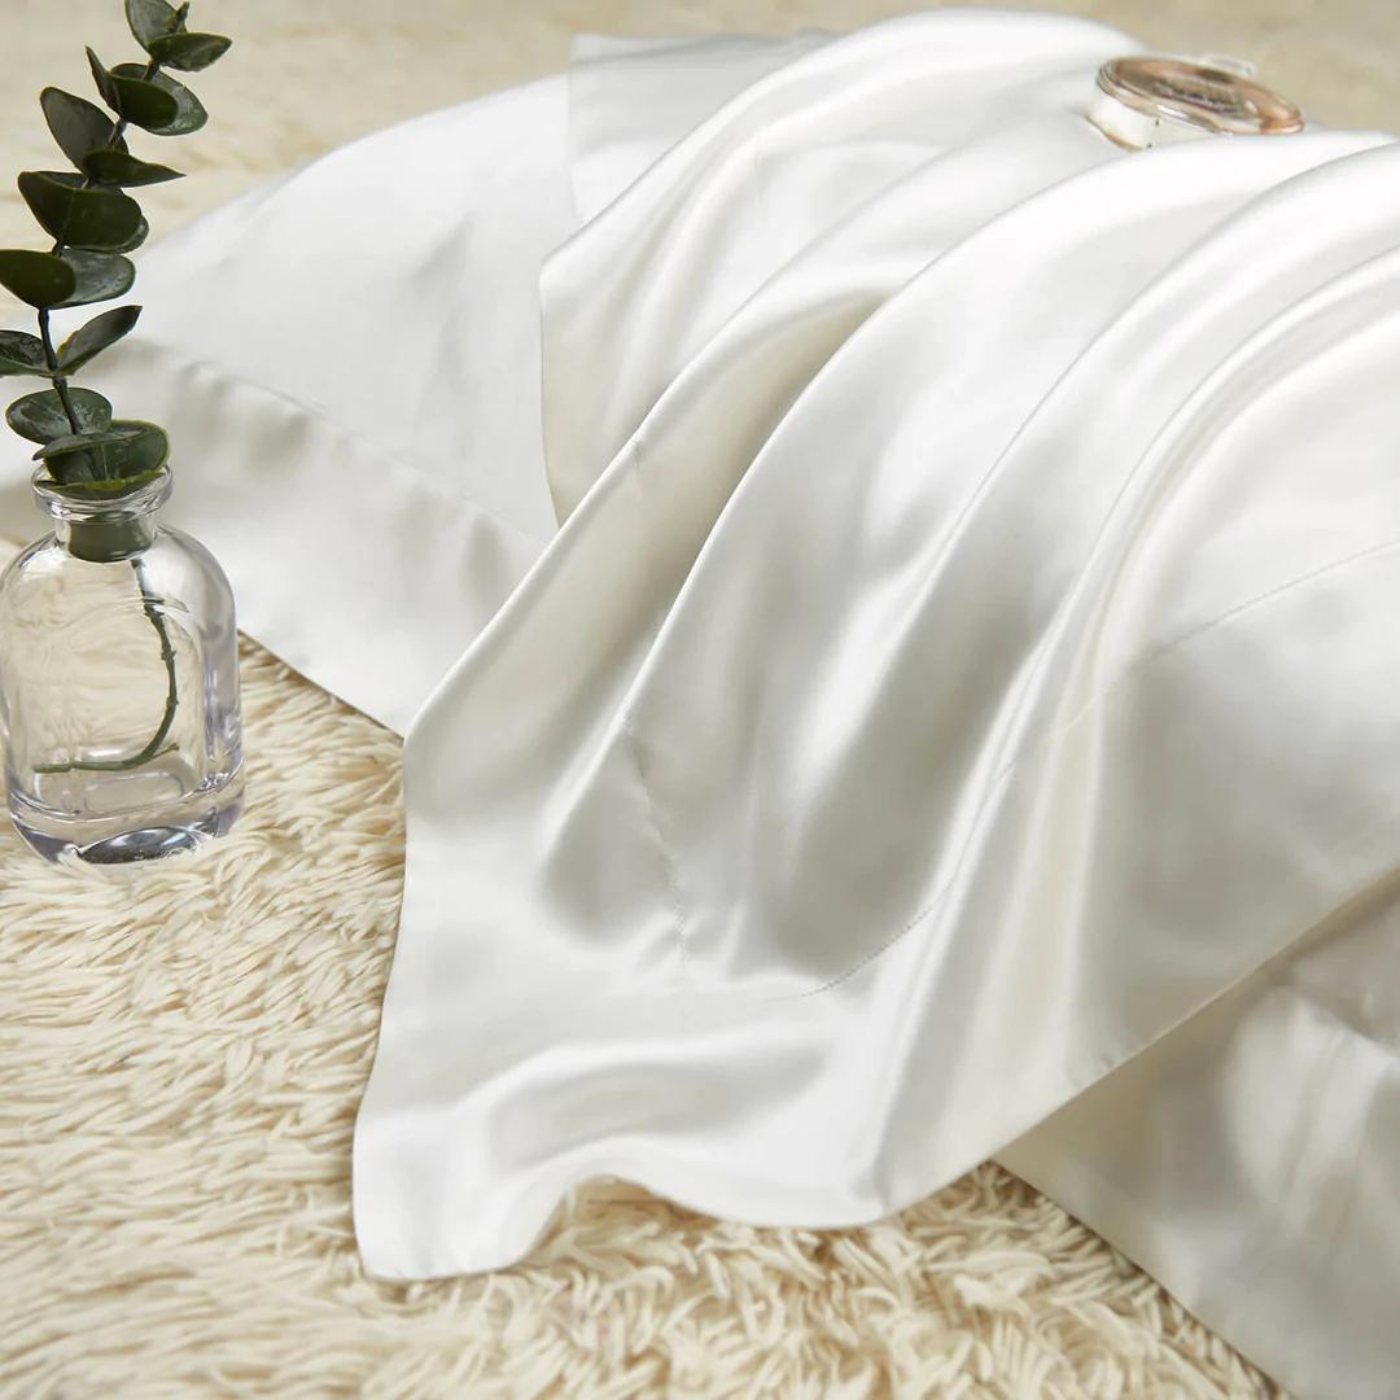 Luxury 4 Psc 22 Momme 100% Mulberry Silk Bedding Set Duvet Cover Fitted Sheet 2 Pillow Covers Cases in White